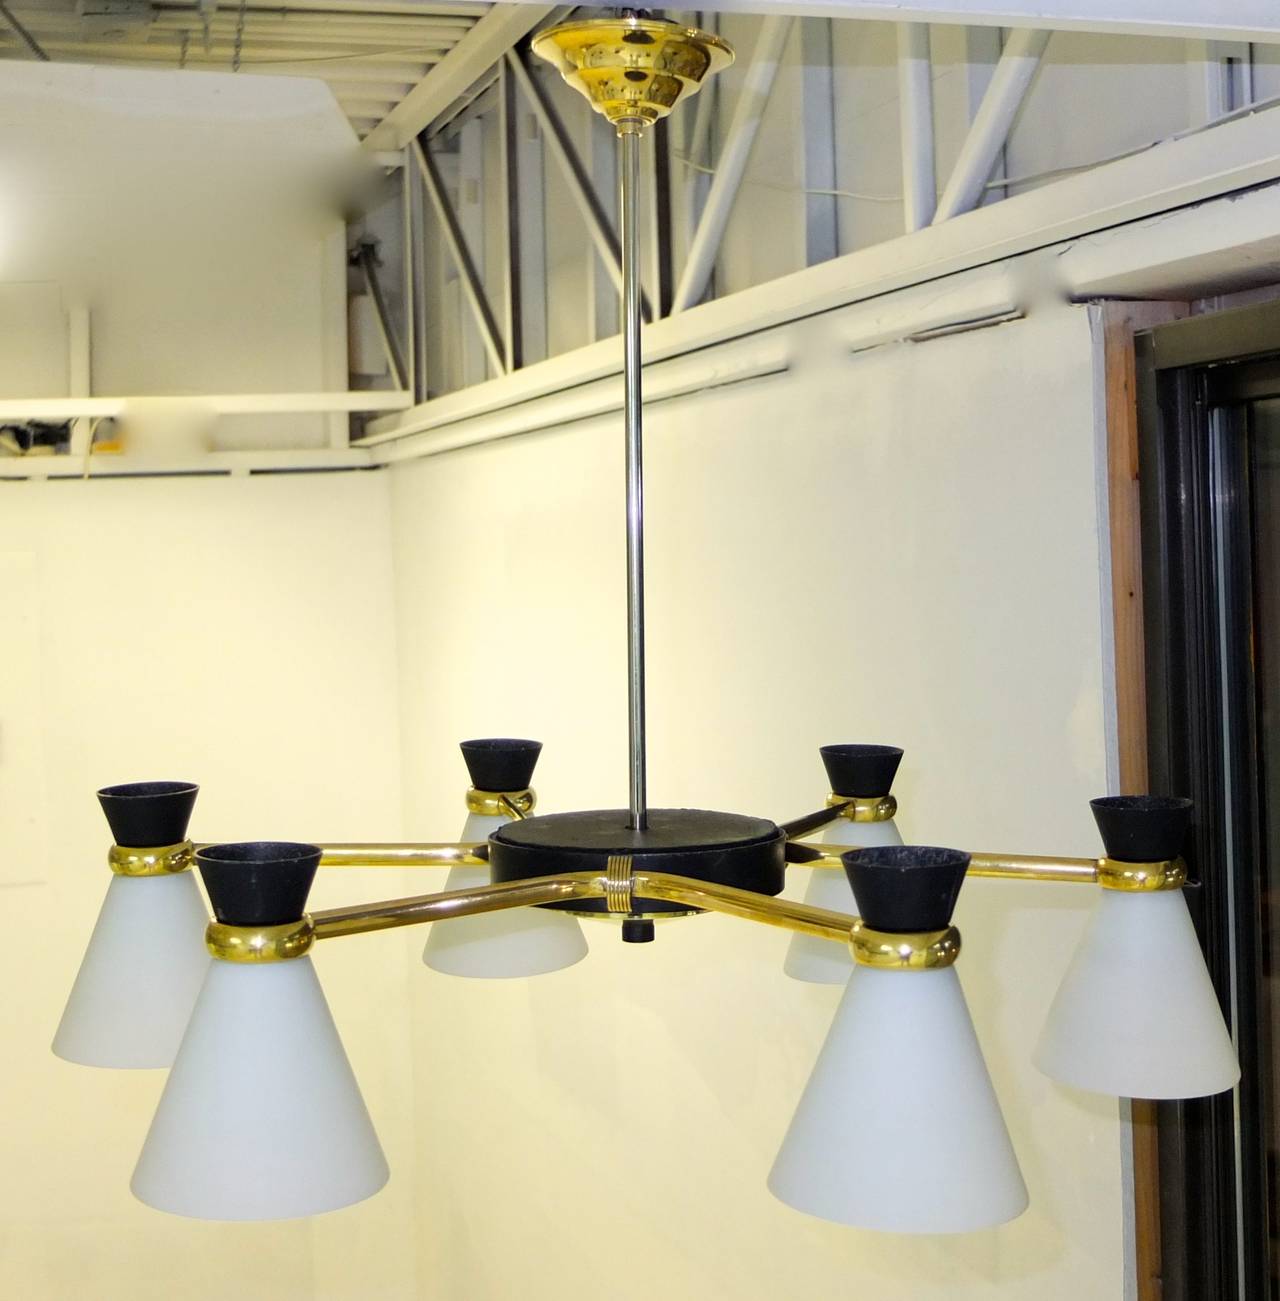 Lovely French 1950s chandelier which is easily adaptable to be a flush mount ceiling fixture.....a black enameled hub around which are three brass double arms each of which hold two diabolo shades made of opaline glass and enameled aluminum.  Each